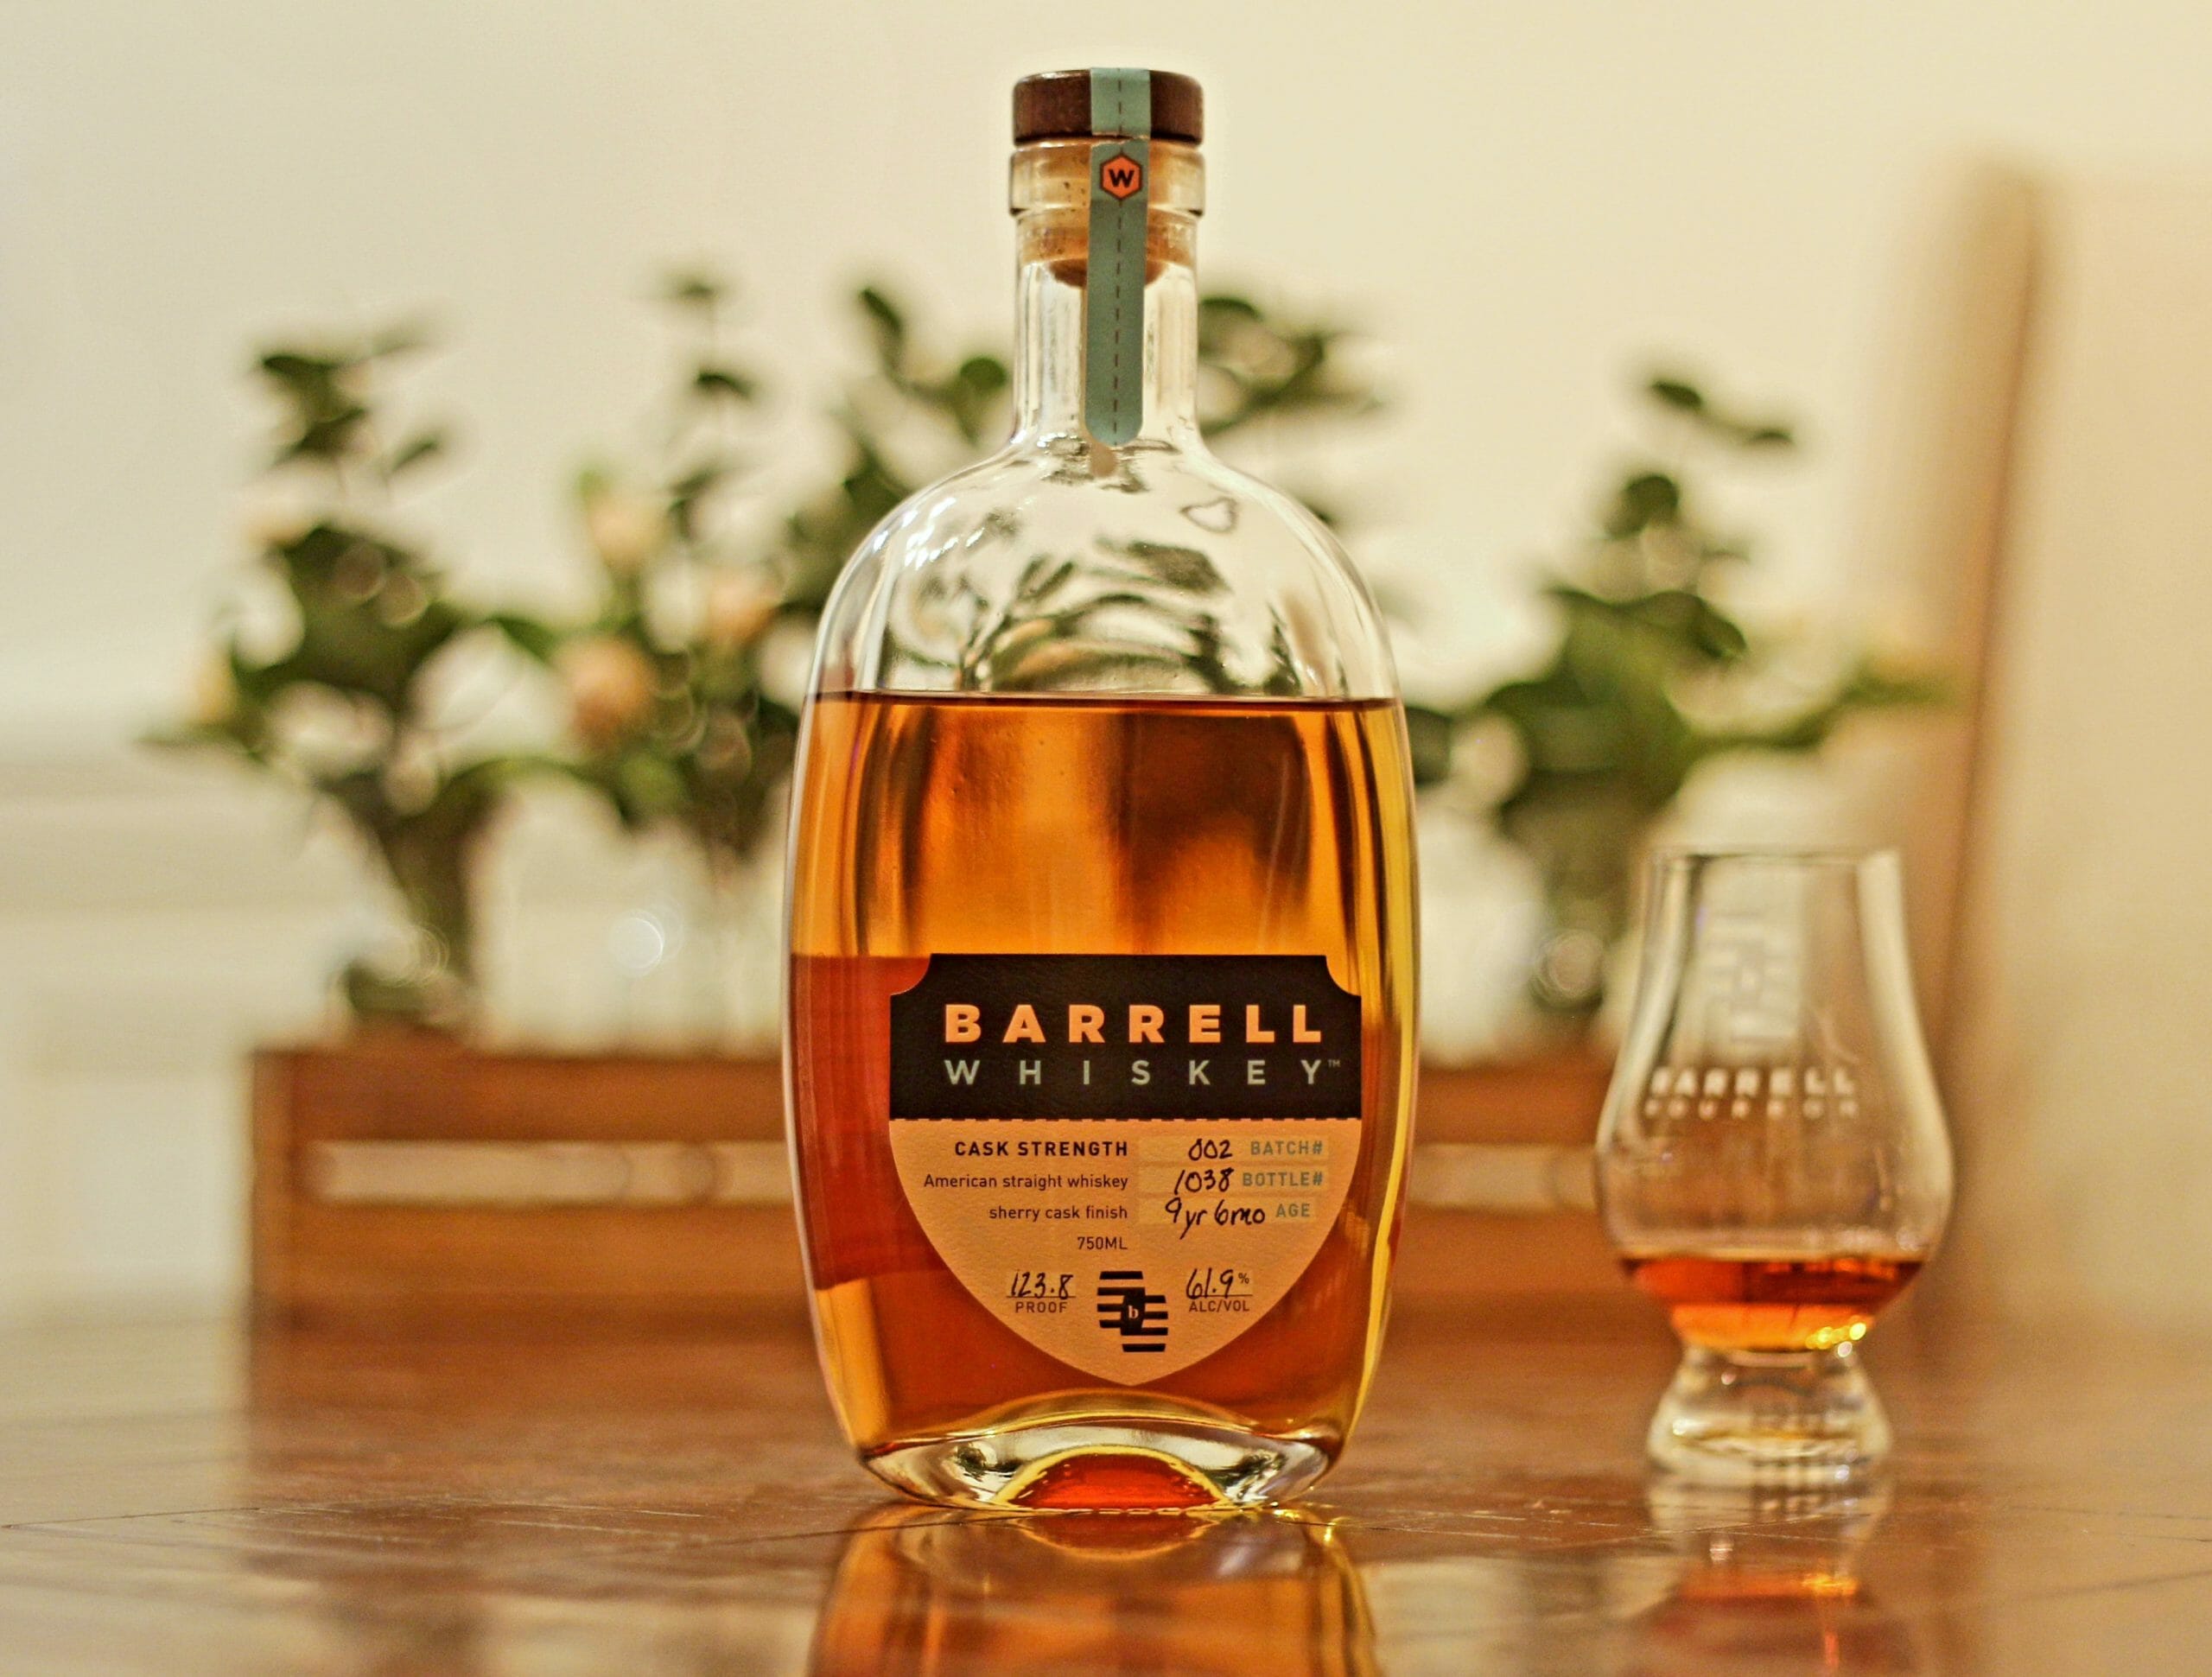 Barrell Whiskey Batch 002 Review